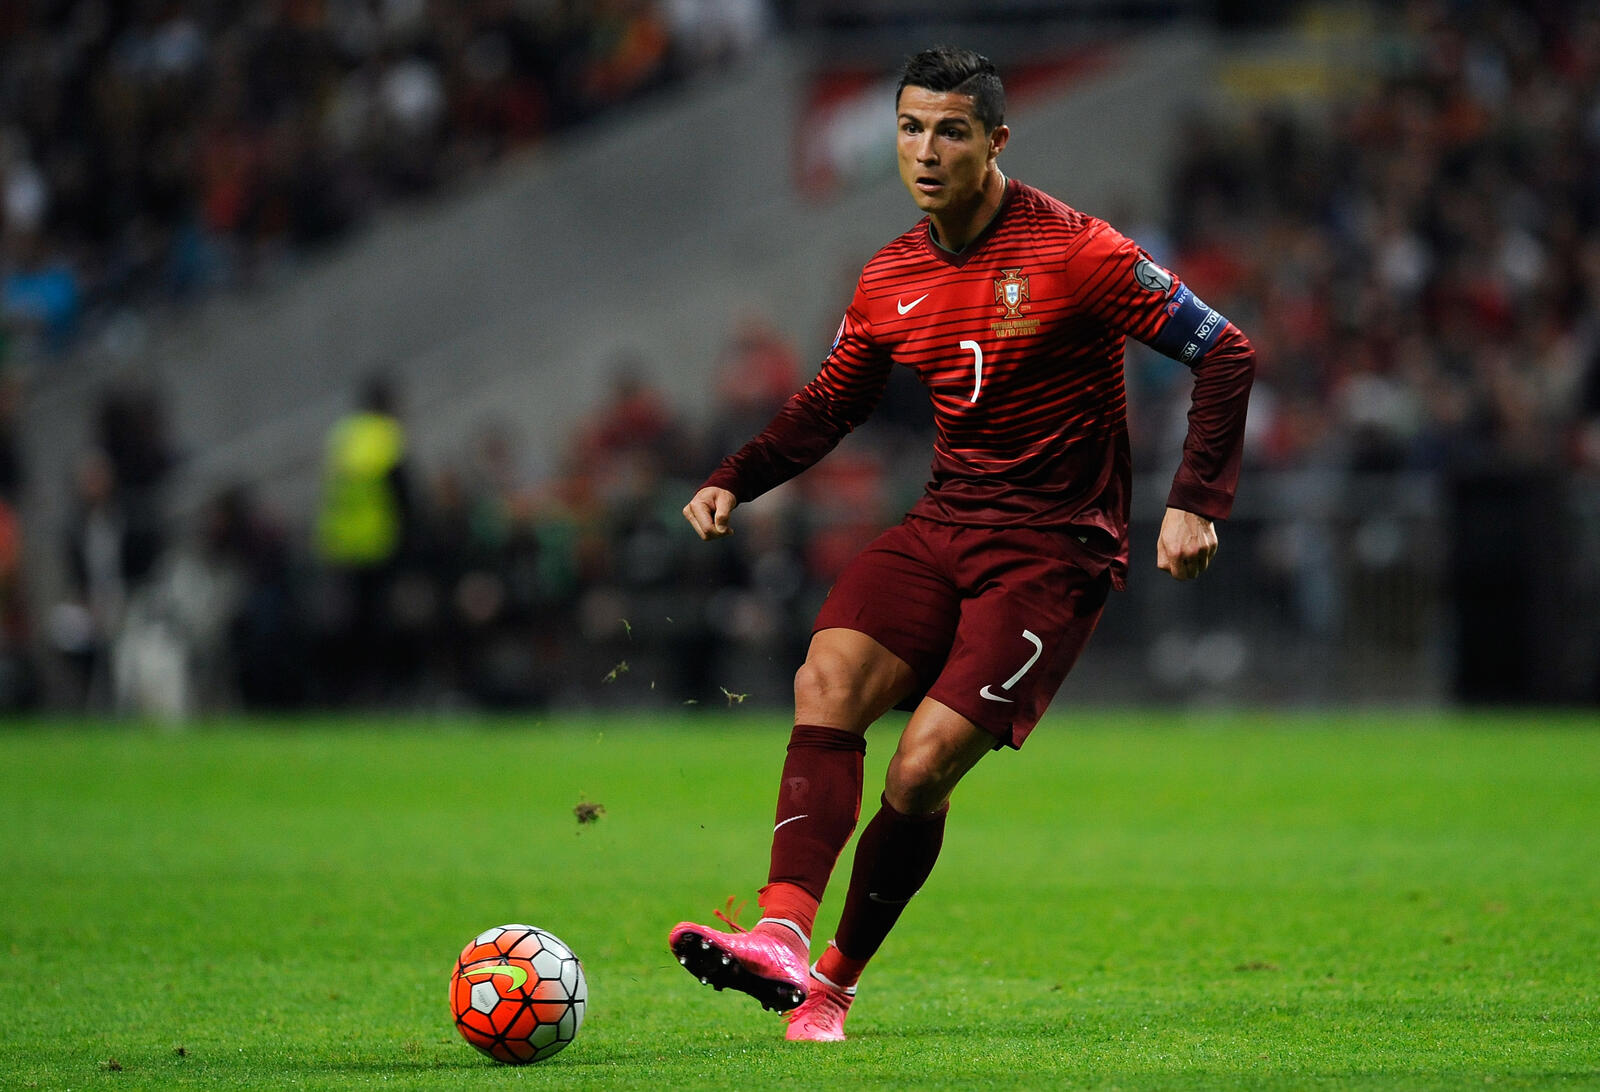 Free photo Cristiano Ronaldo wearing a red suit on the soccer field